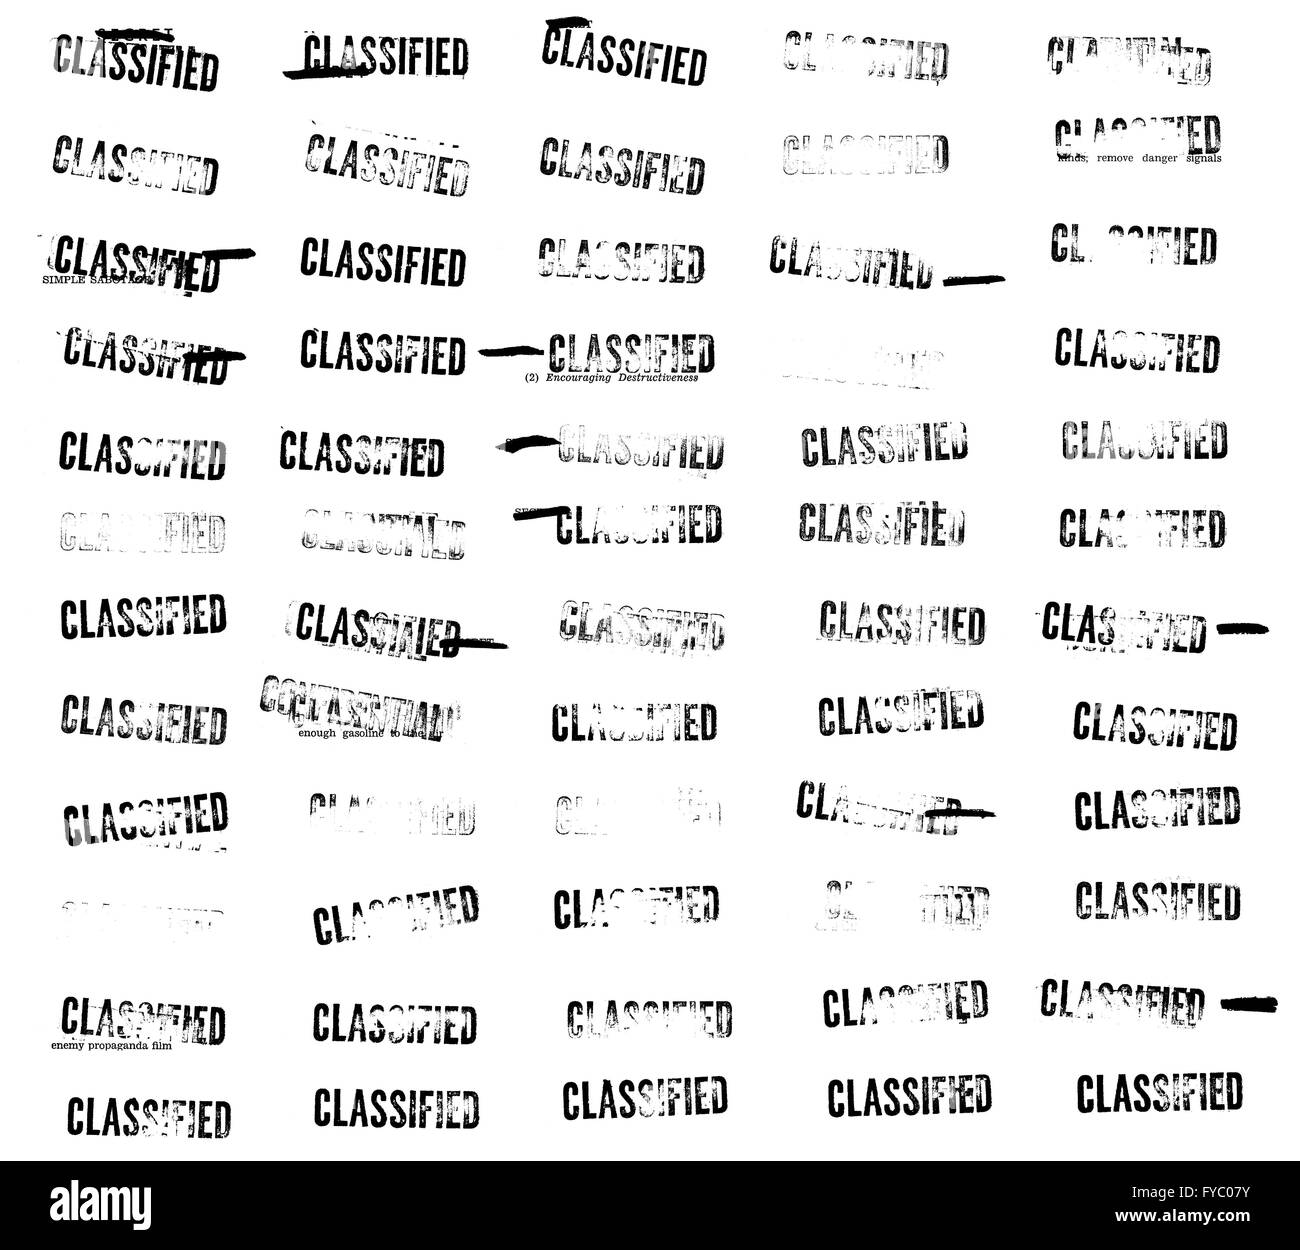 Sixty (60) classified stamps and redactions from an official Cold War sabotage manual Stock Photo